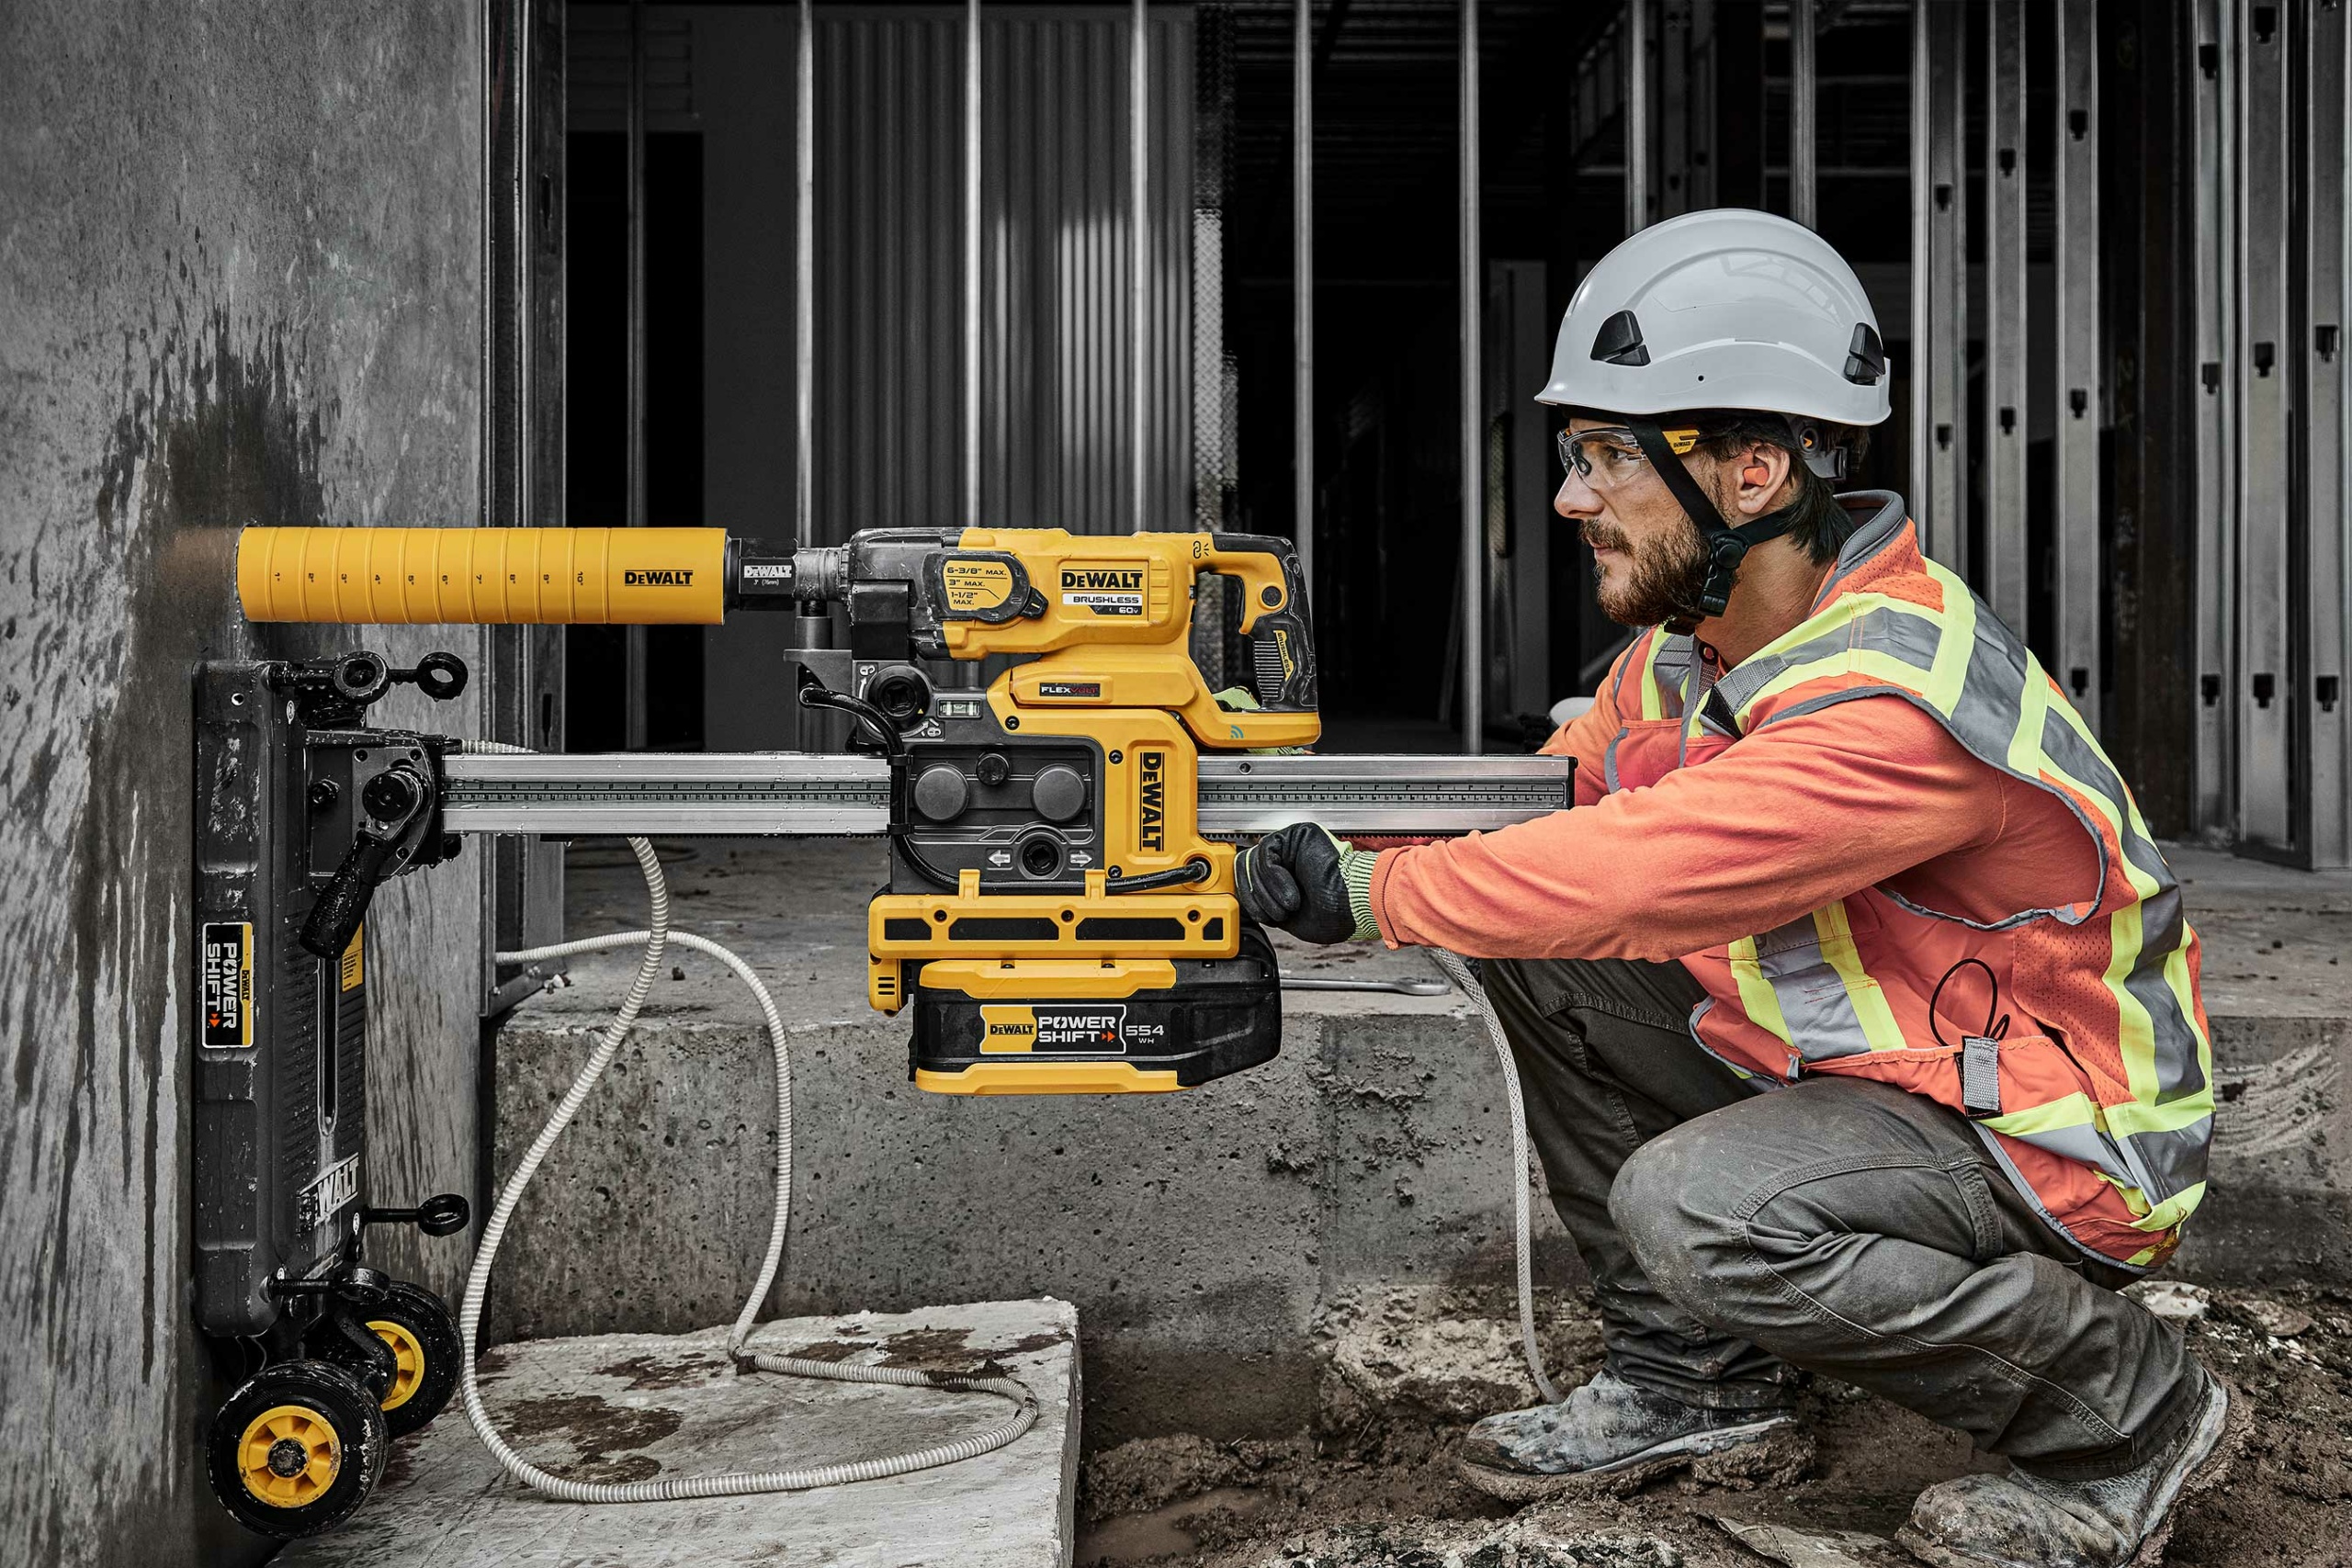 DEWALT POWERSHIFT Core Drill and Stand